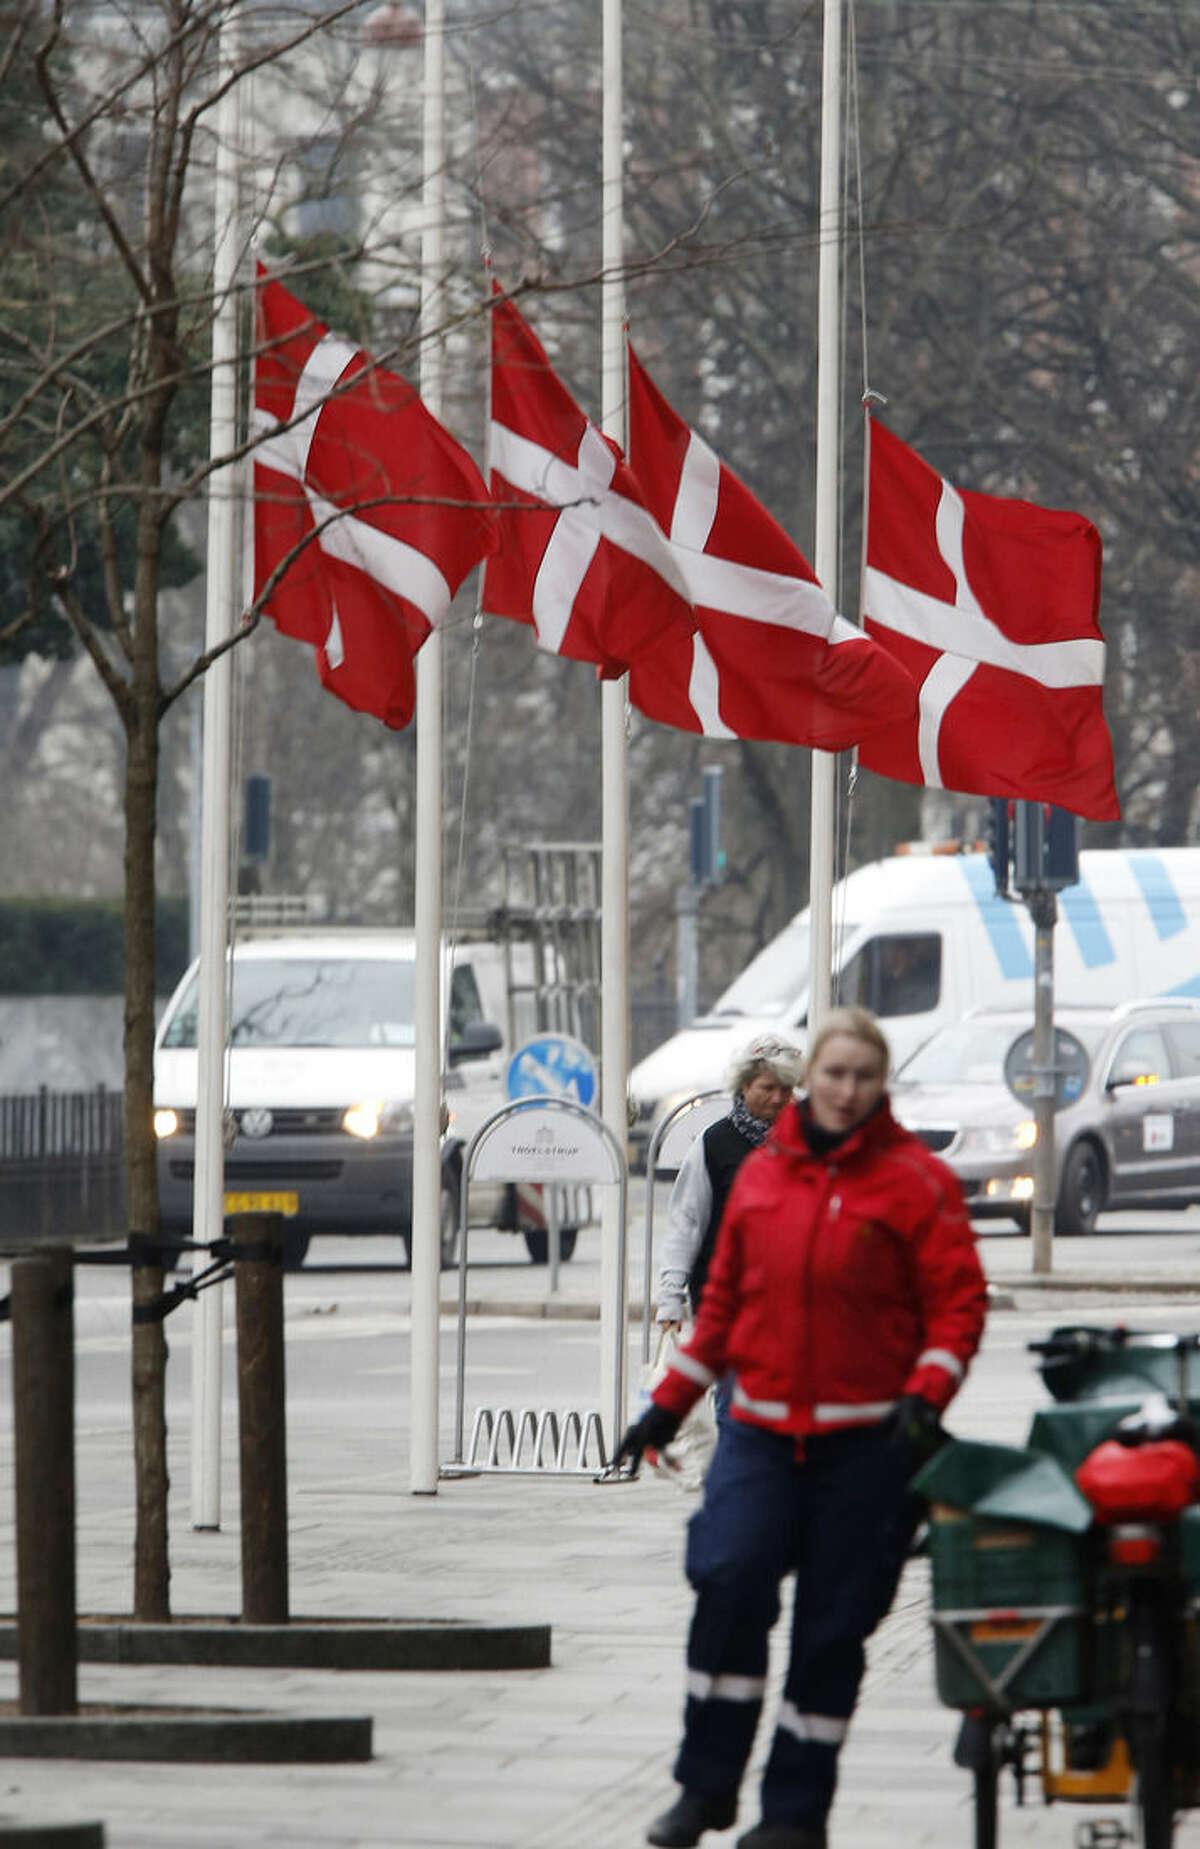 Danish flags are on half-mast in Copenhagen, Denmark, Monday, Feb. 16, 2015 after an alleged shooter killed two persons. Danish police shot and killed the man early Sunday suspected of carrying out shooting attacks at a free speech event and then at a Copenhagen synagogue, killing a Danish documentary filmmaker and a member of the Scandinavian country's Jewish community. (AP Photo/Michael Probst)